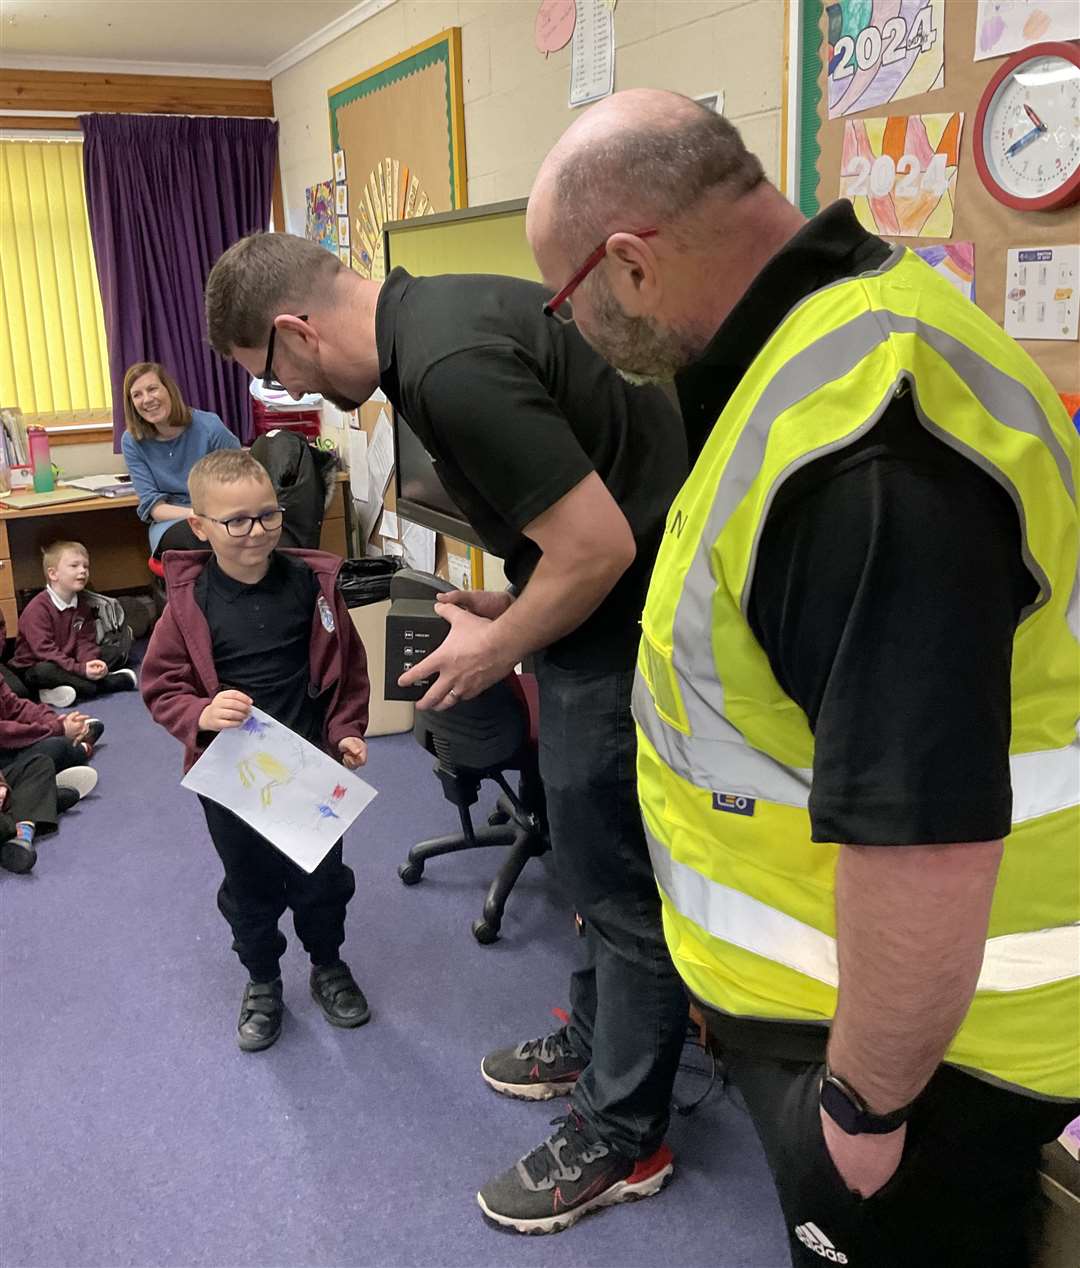 Runner-up Jaxon Garrett-Atkins from Dunbeath Primary School receiving his prize from Dounreay's James Steven and Rob Macleod.